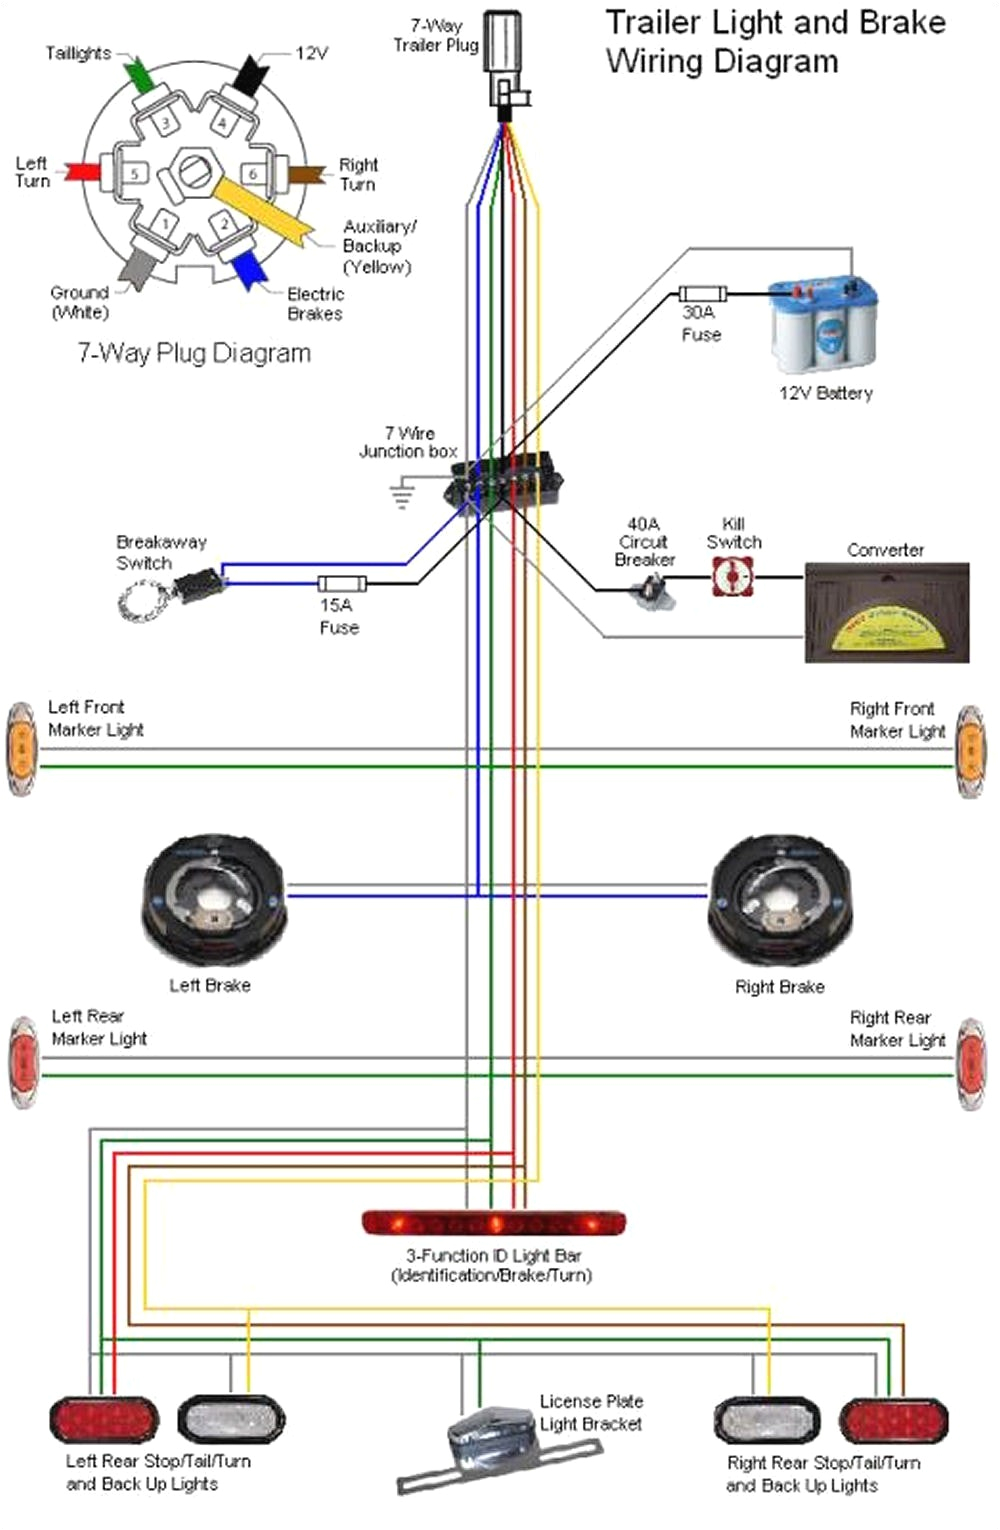 wiring diagram stunningn trailer harness to adapter system printable free jpg